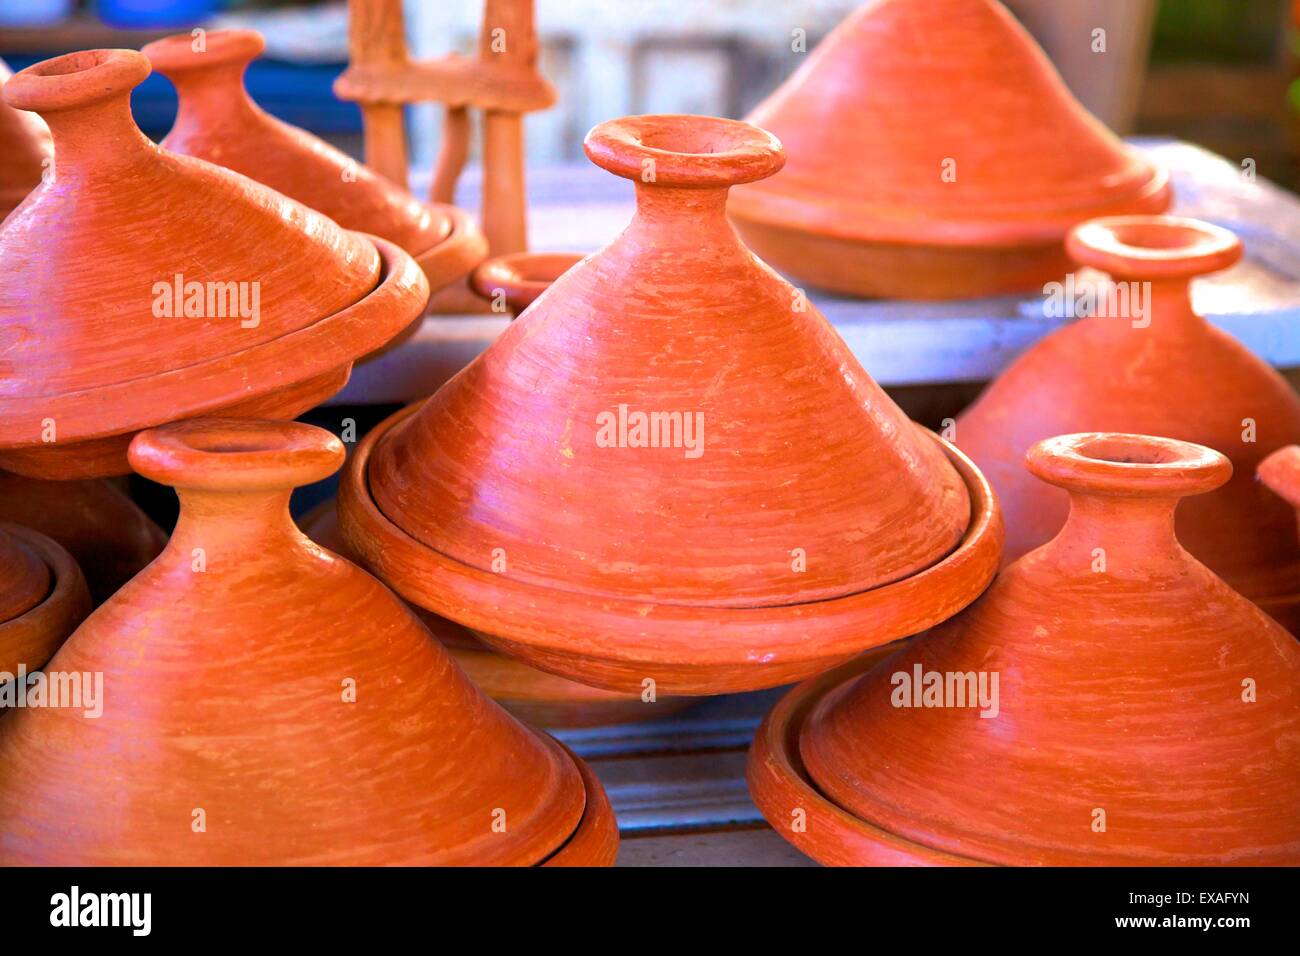 Tagine pots, Tangier, Morocco, North Africa, Africa Stock Photo